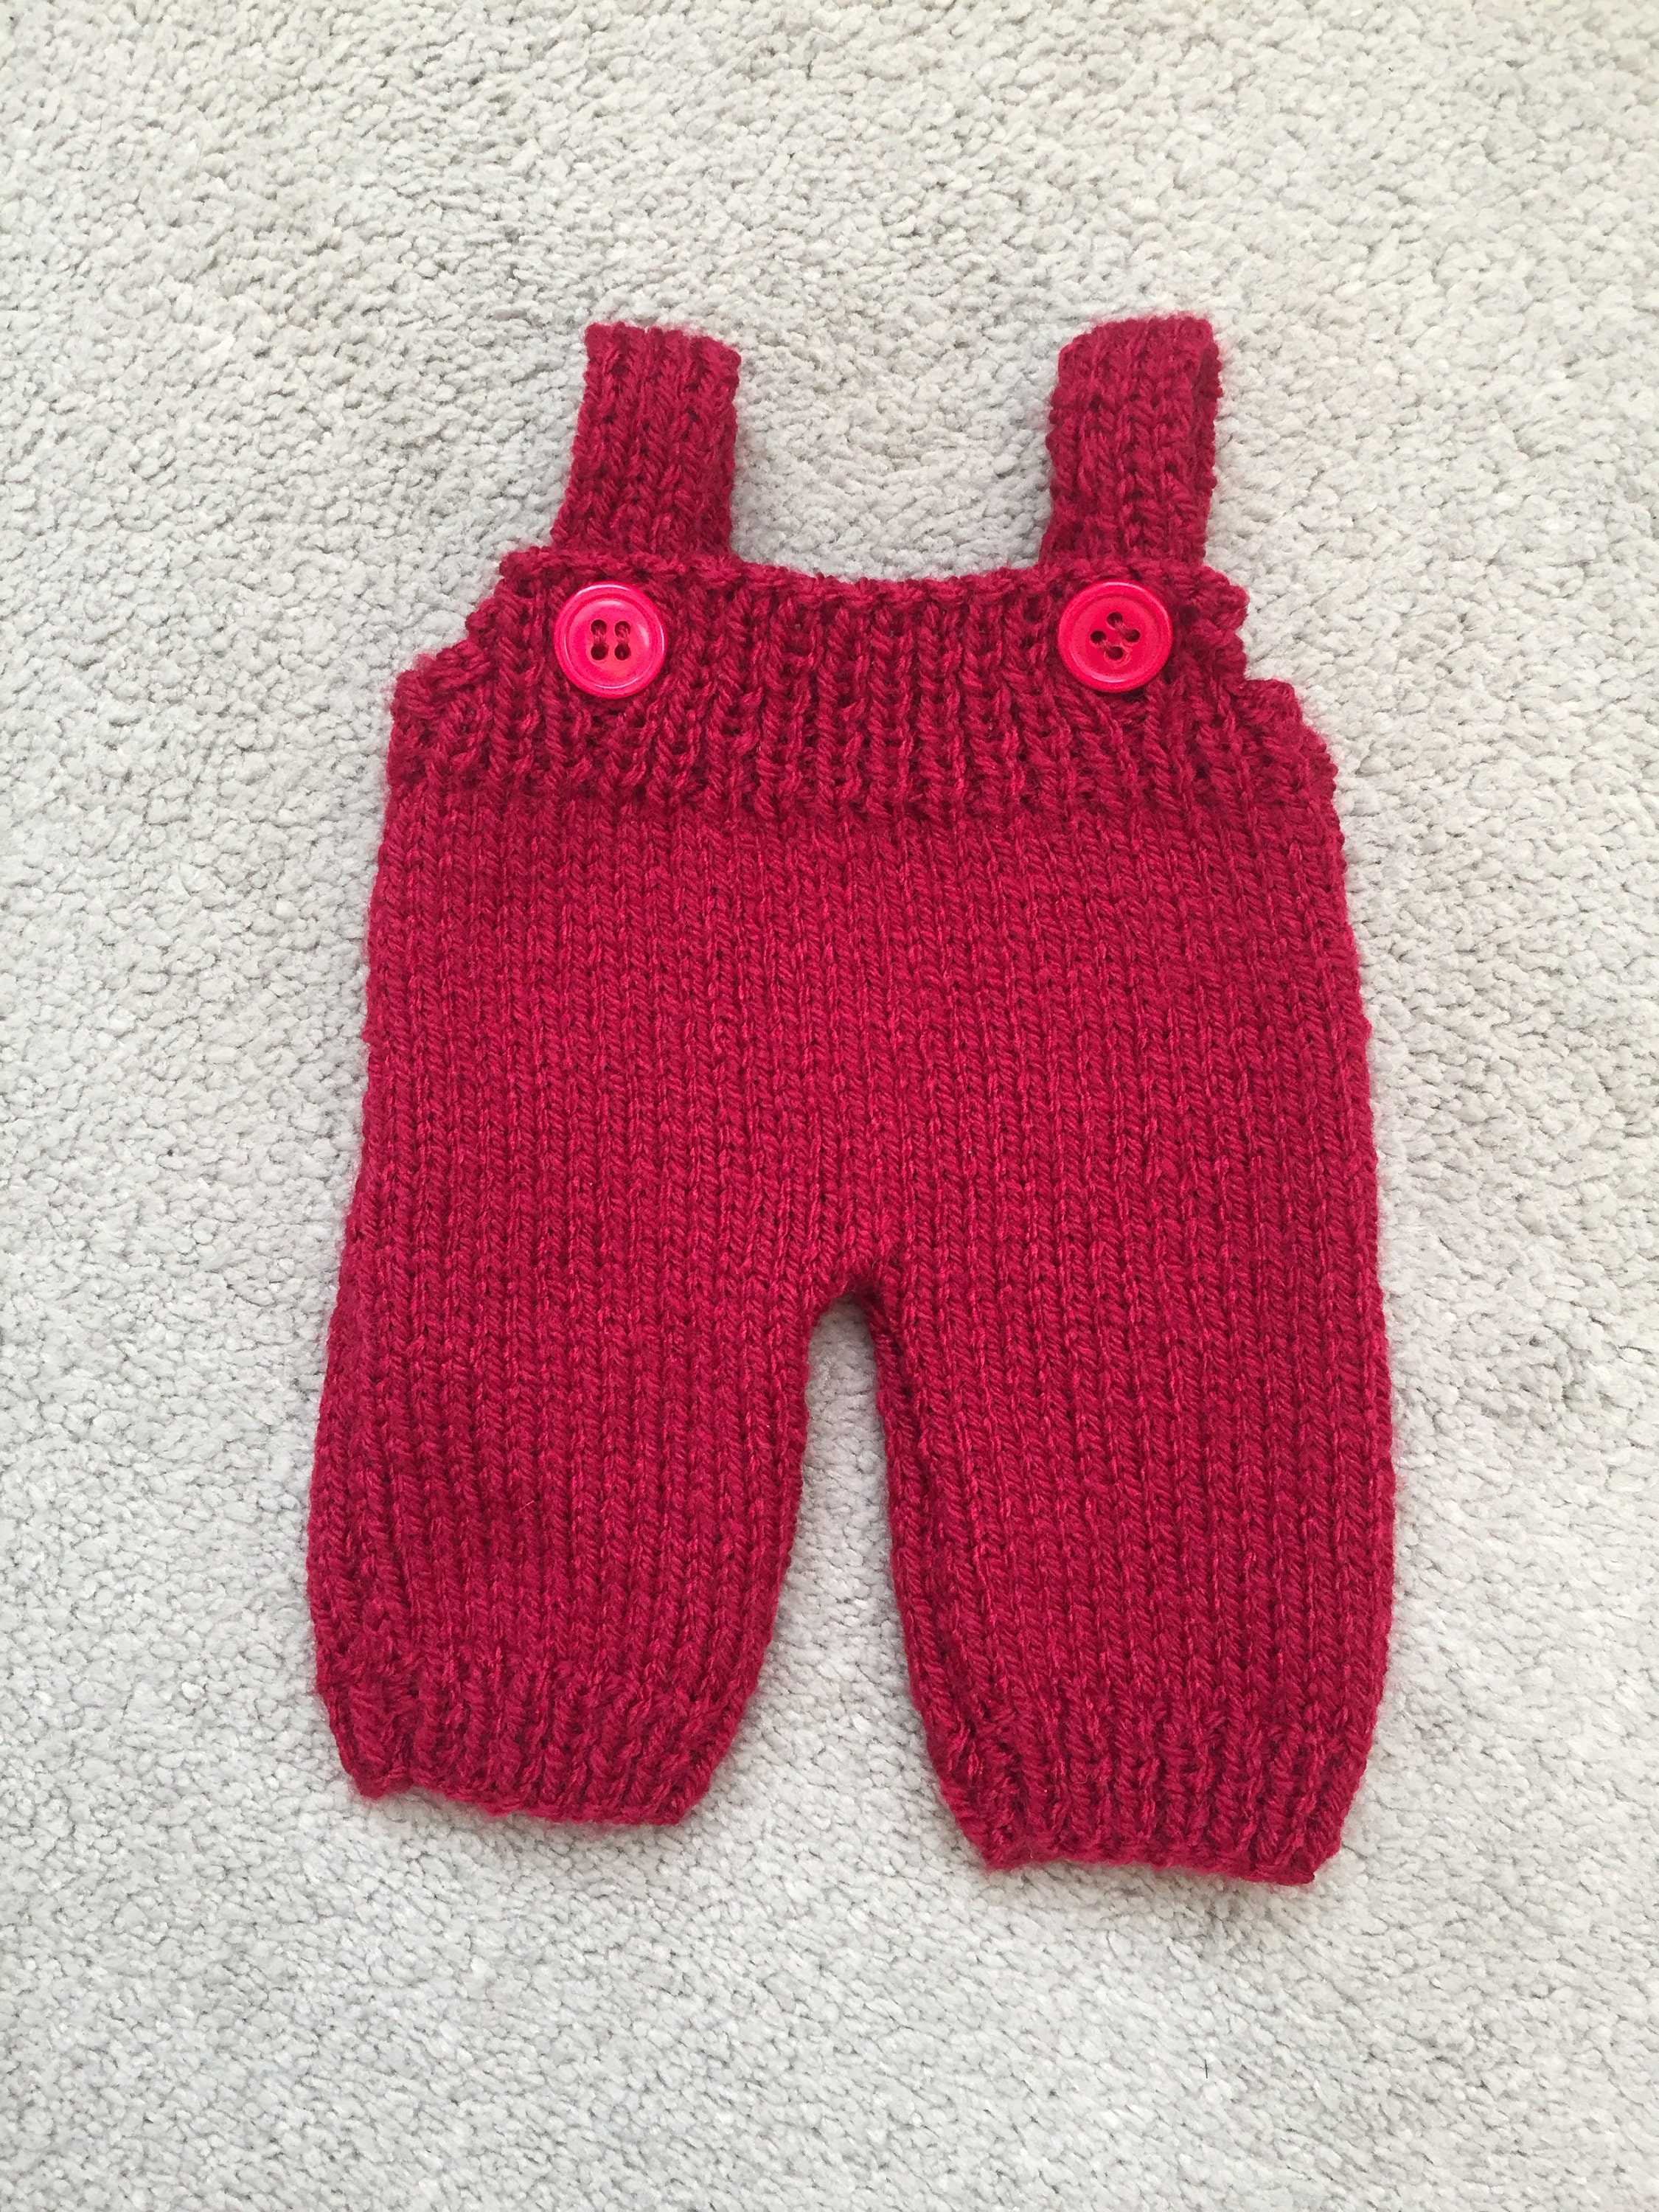 New Hand Knitted Dolls Clothes To Fit 12-14 Inch Doll 